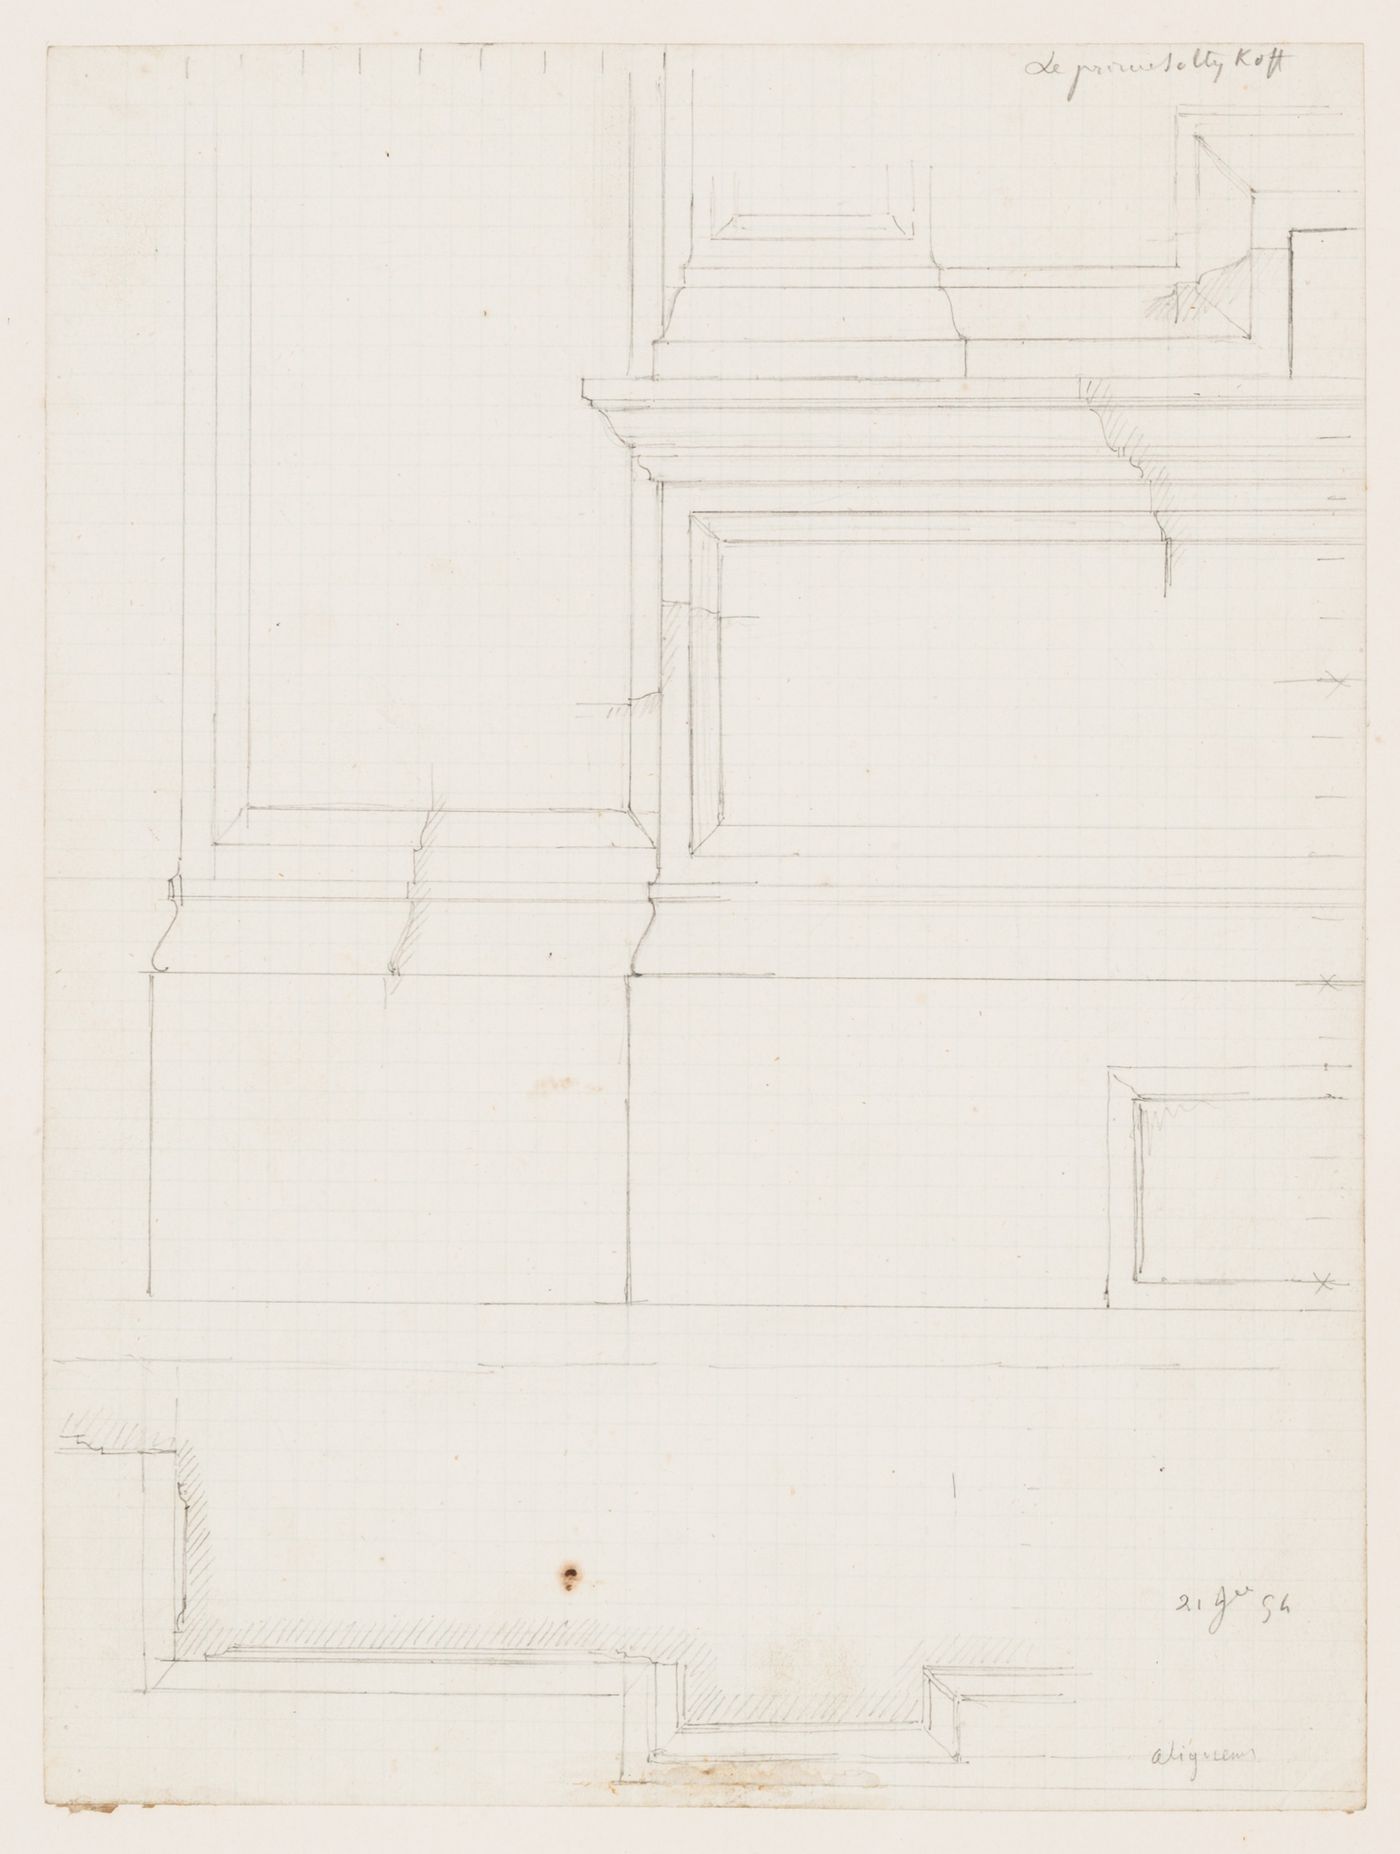 Preliminary drawings Hôtel Soltykoff, including an elevation, partial elevations, profiles and a plan